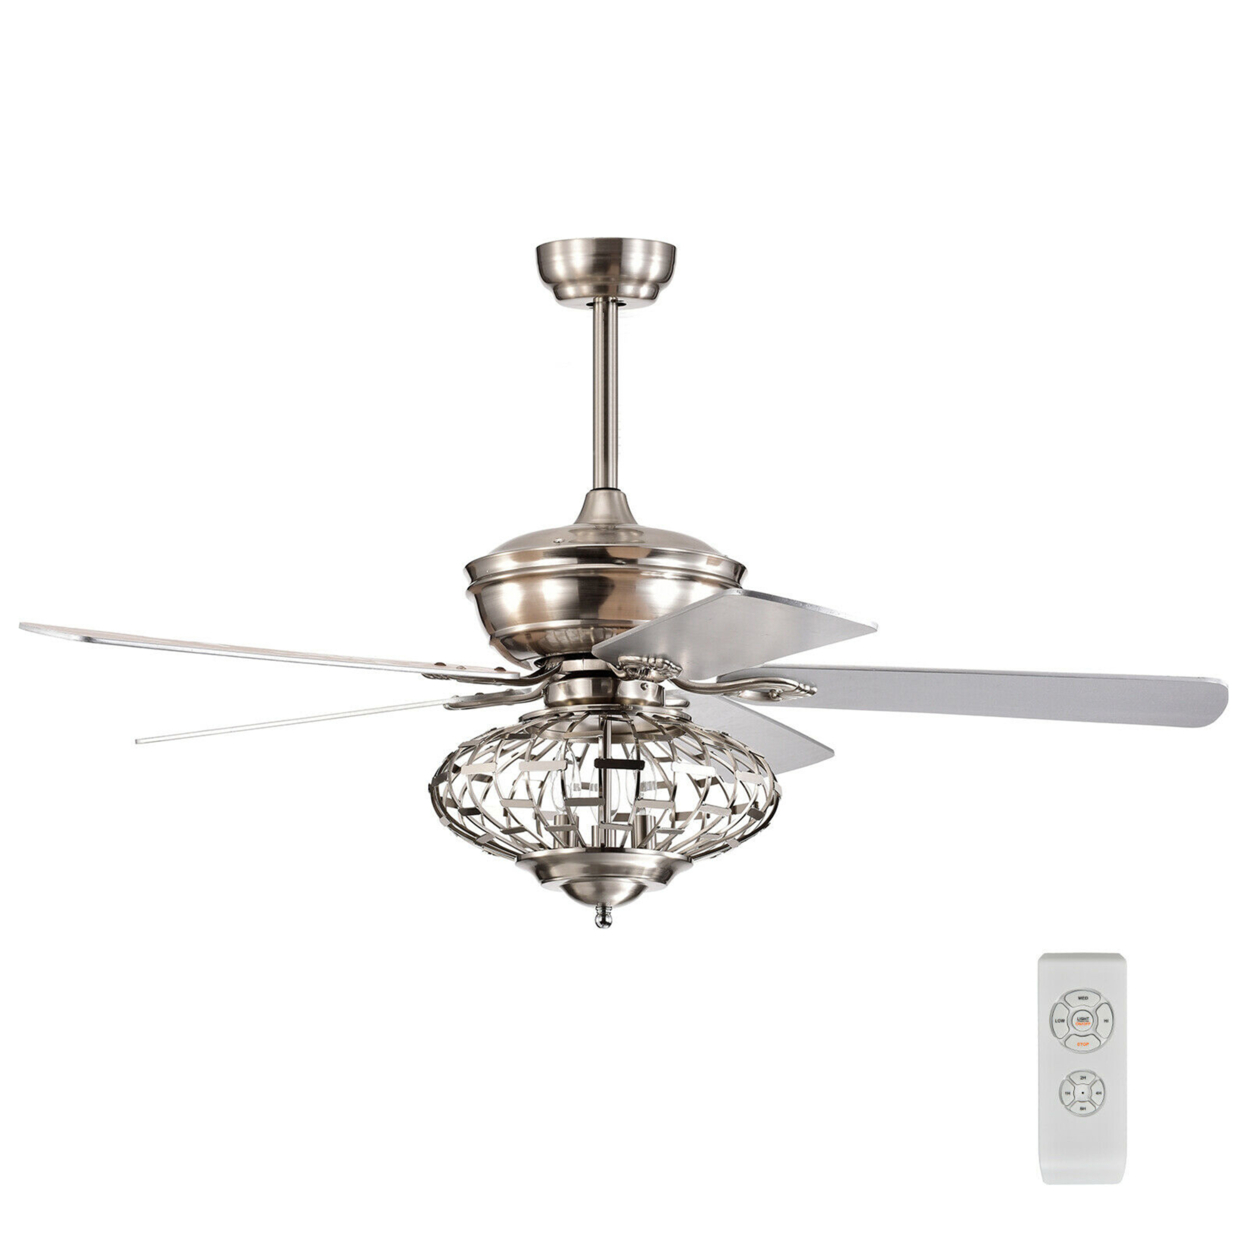 52'' Ceiling Fan With Light Nickel Plated Color Wooden Blades W/Remote Control